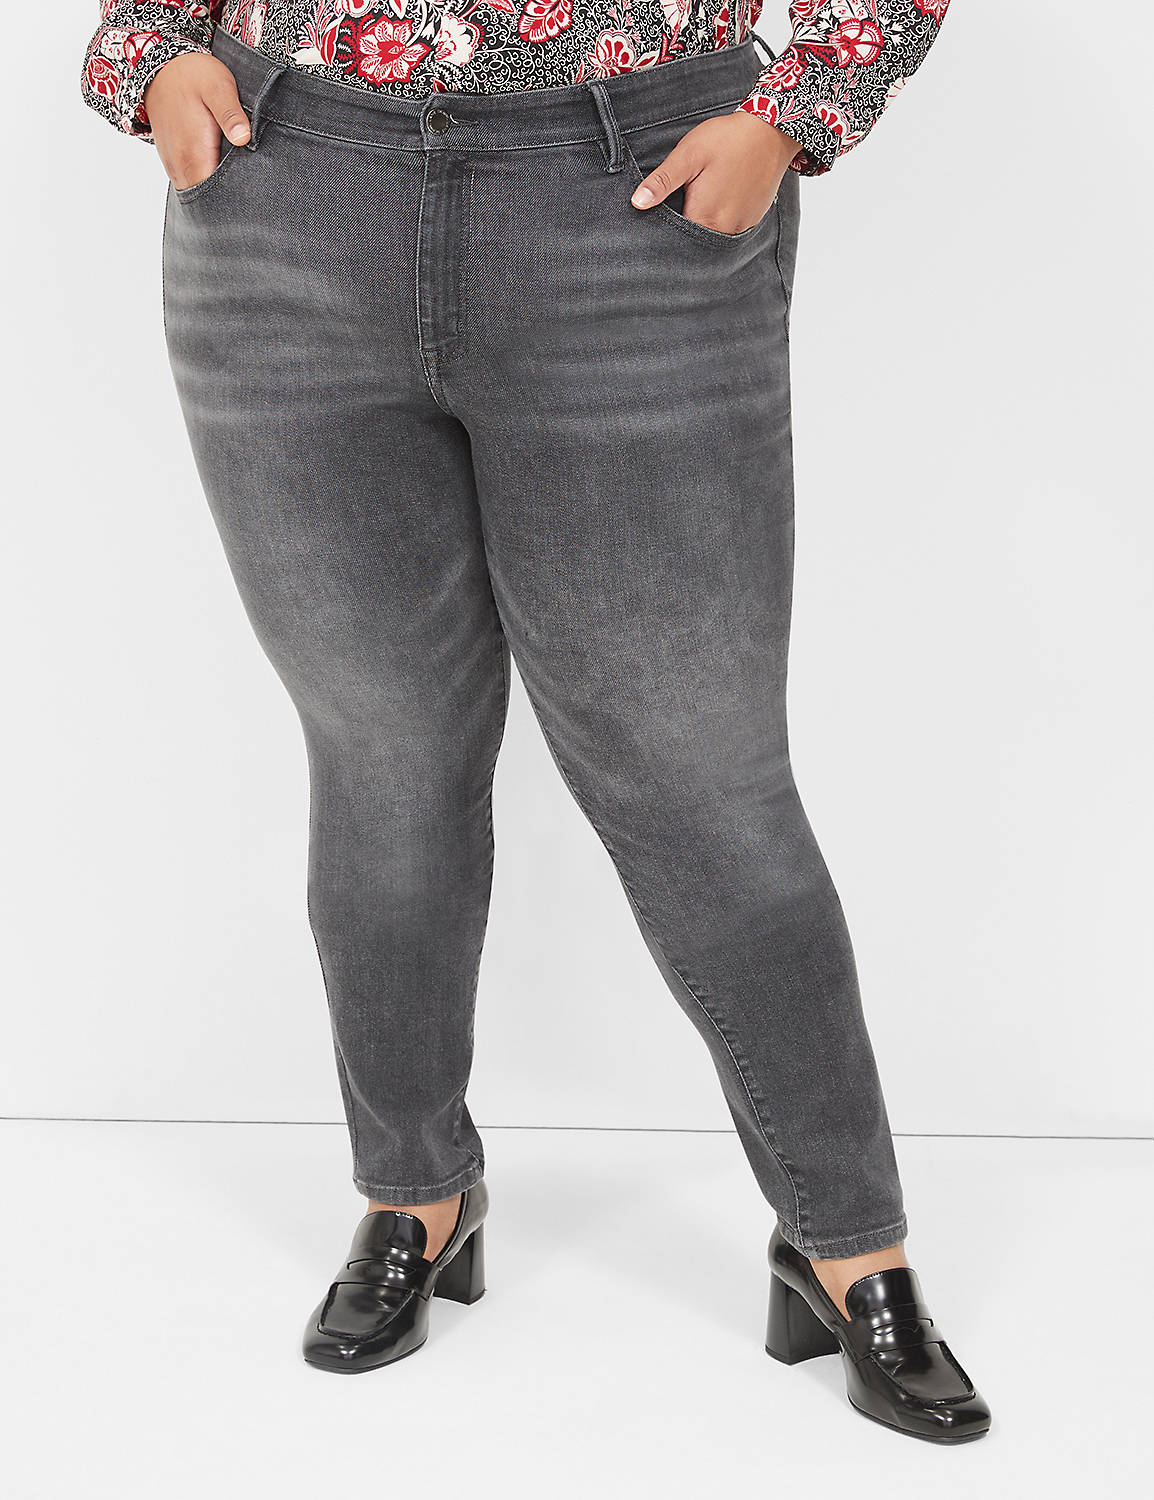 SIGNATURE MID RISE SKINNY - GREY CL Product Image 1